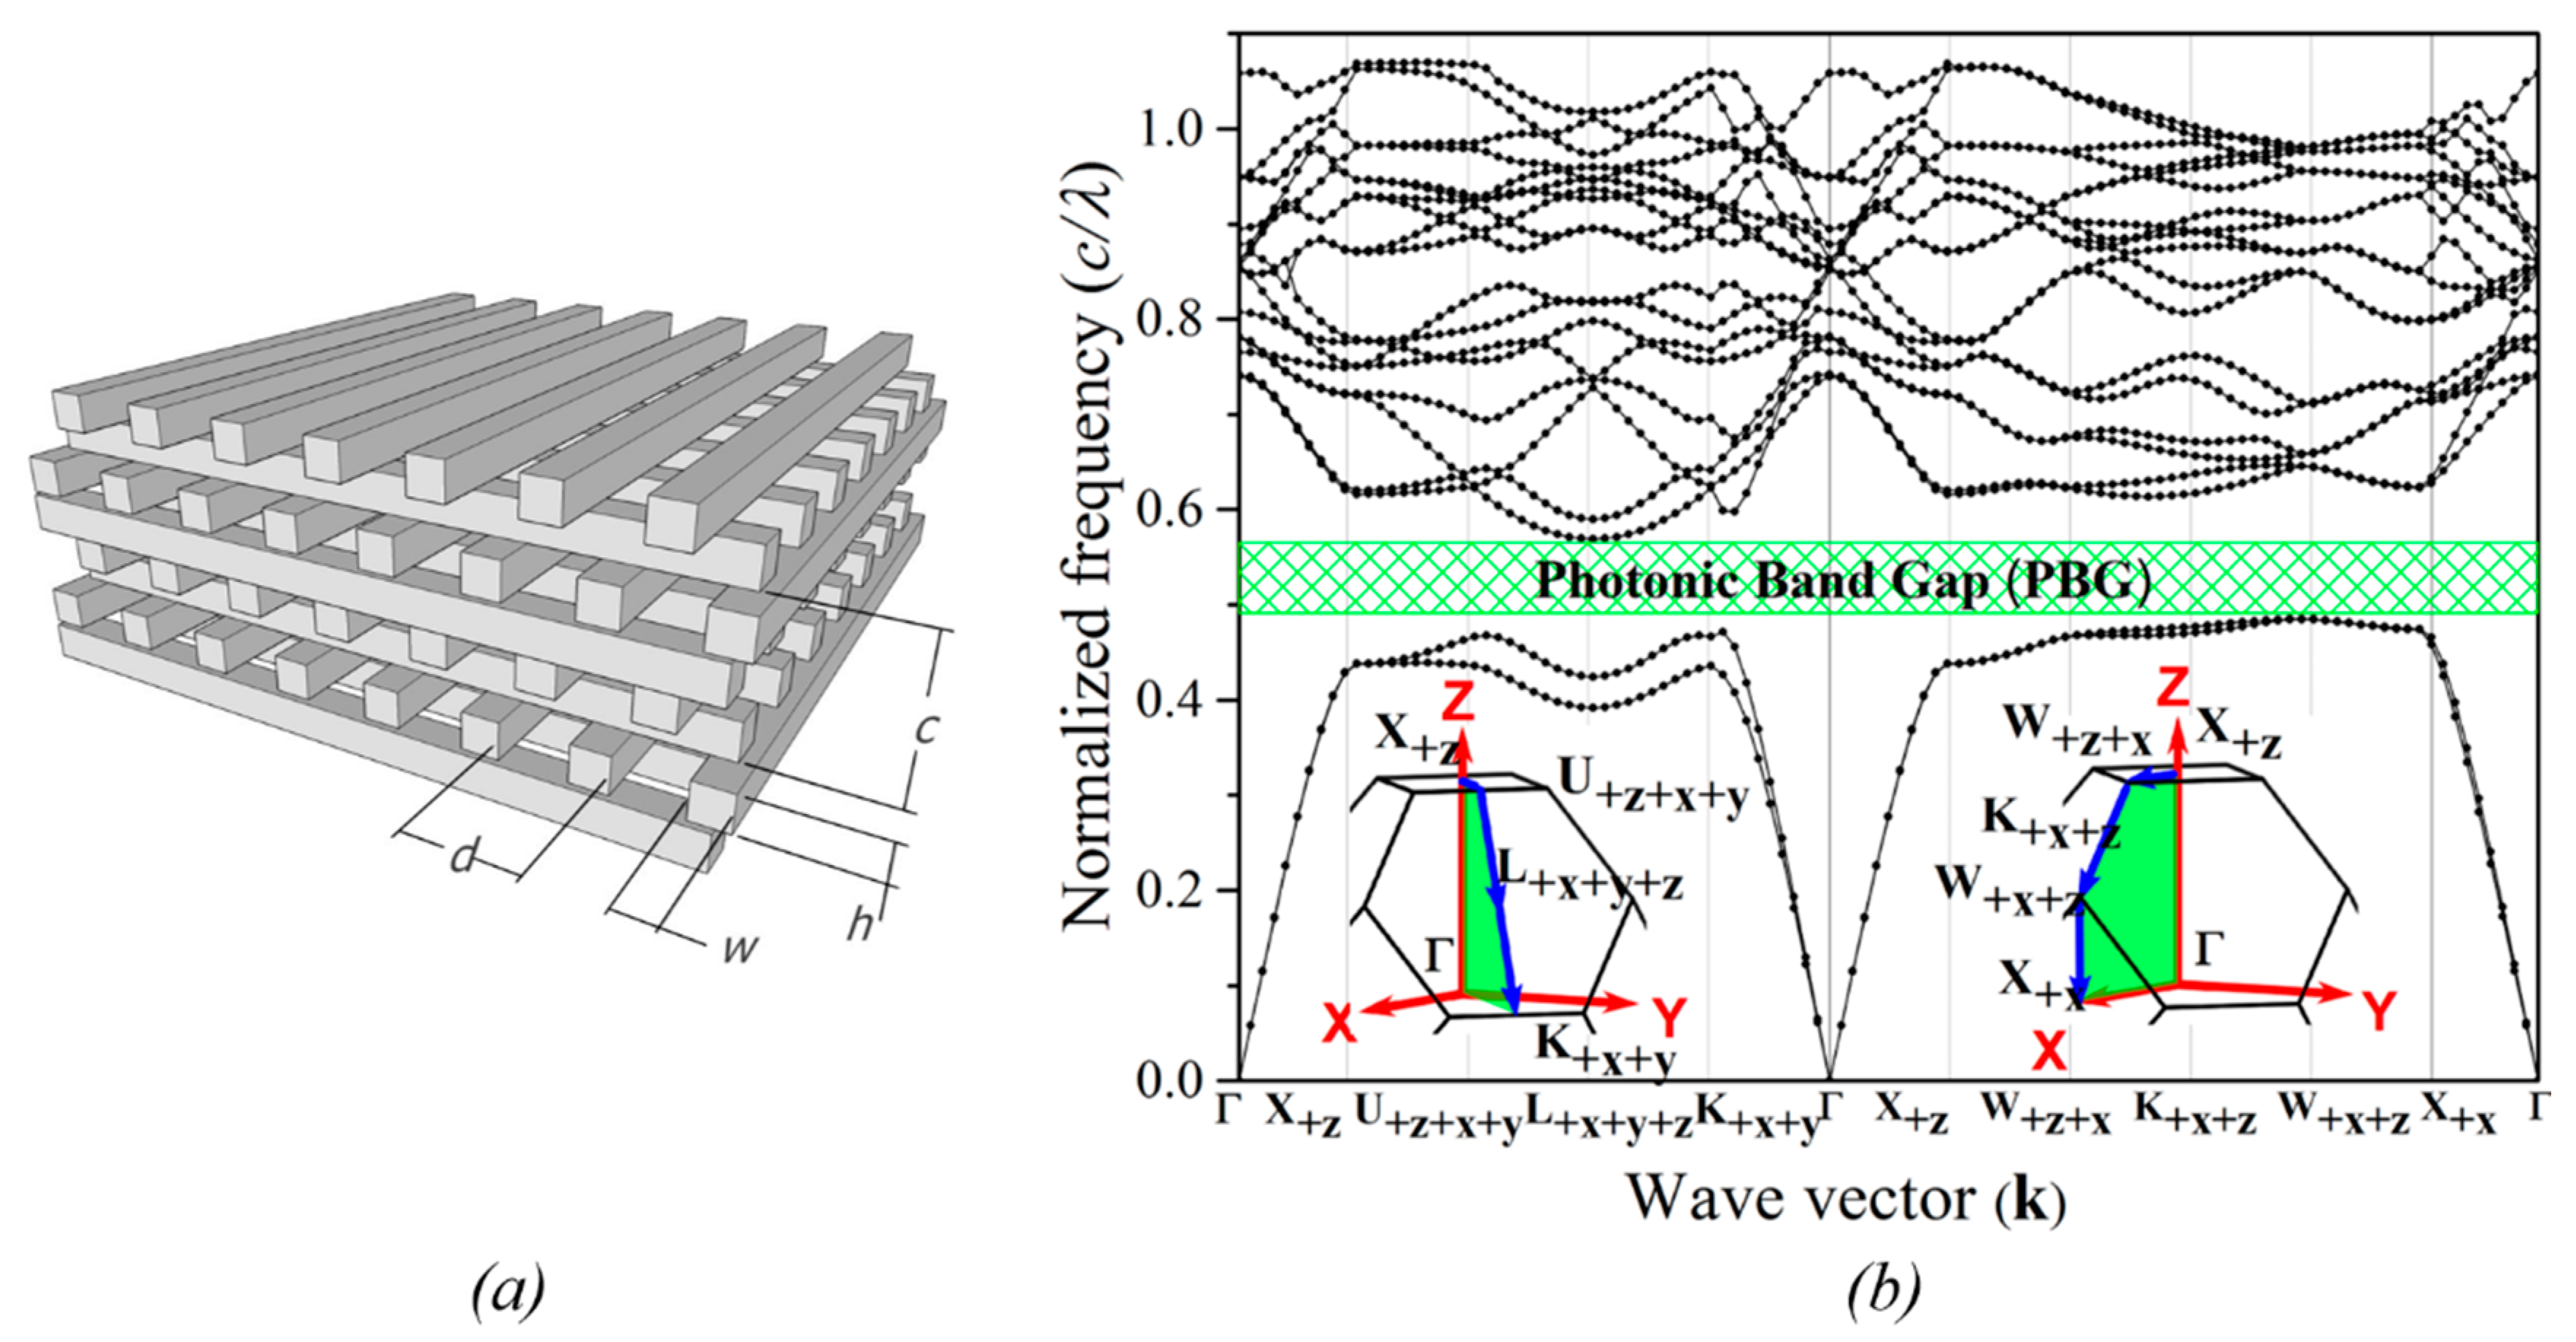 Applied Sciences Free Full Text Cavity Design In Woodpile Based 3d Photonic Crystals Html